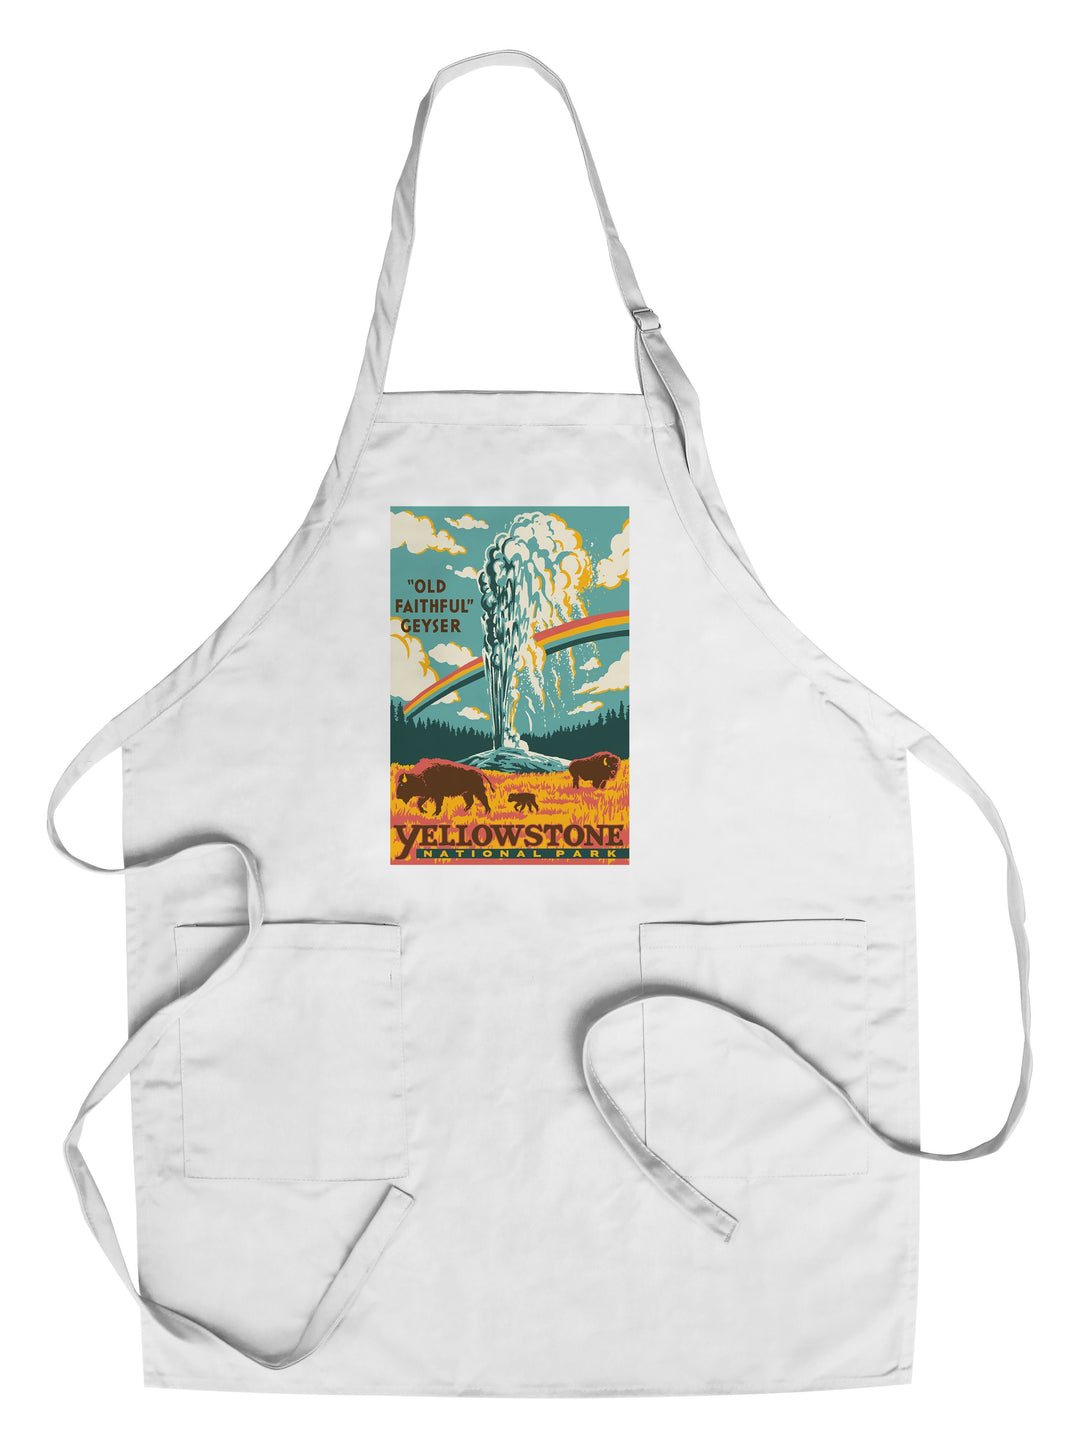 Yellowstone National Park, Wyoming, Explorer Series, Old Faithful Geyser, Towels and Aprons Kitchen Lantern Press Chef's Apron 